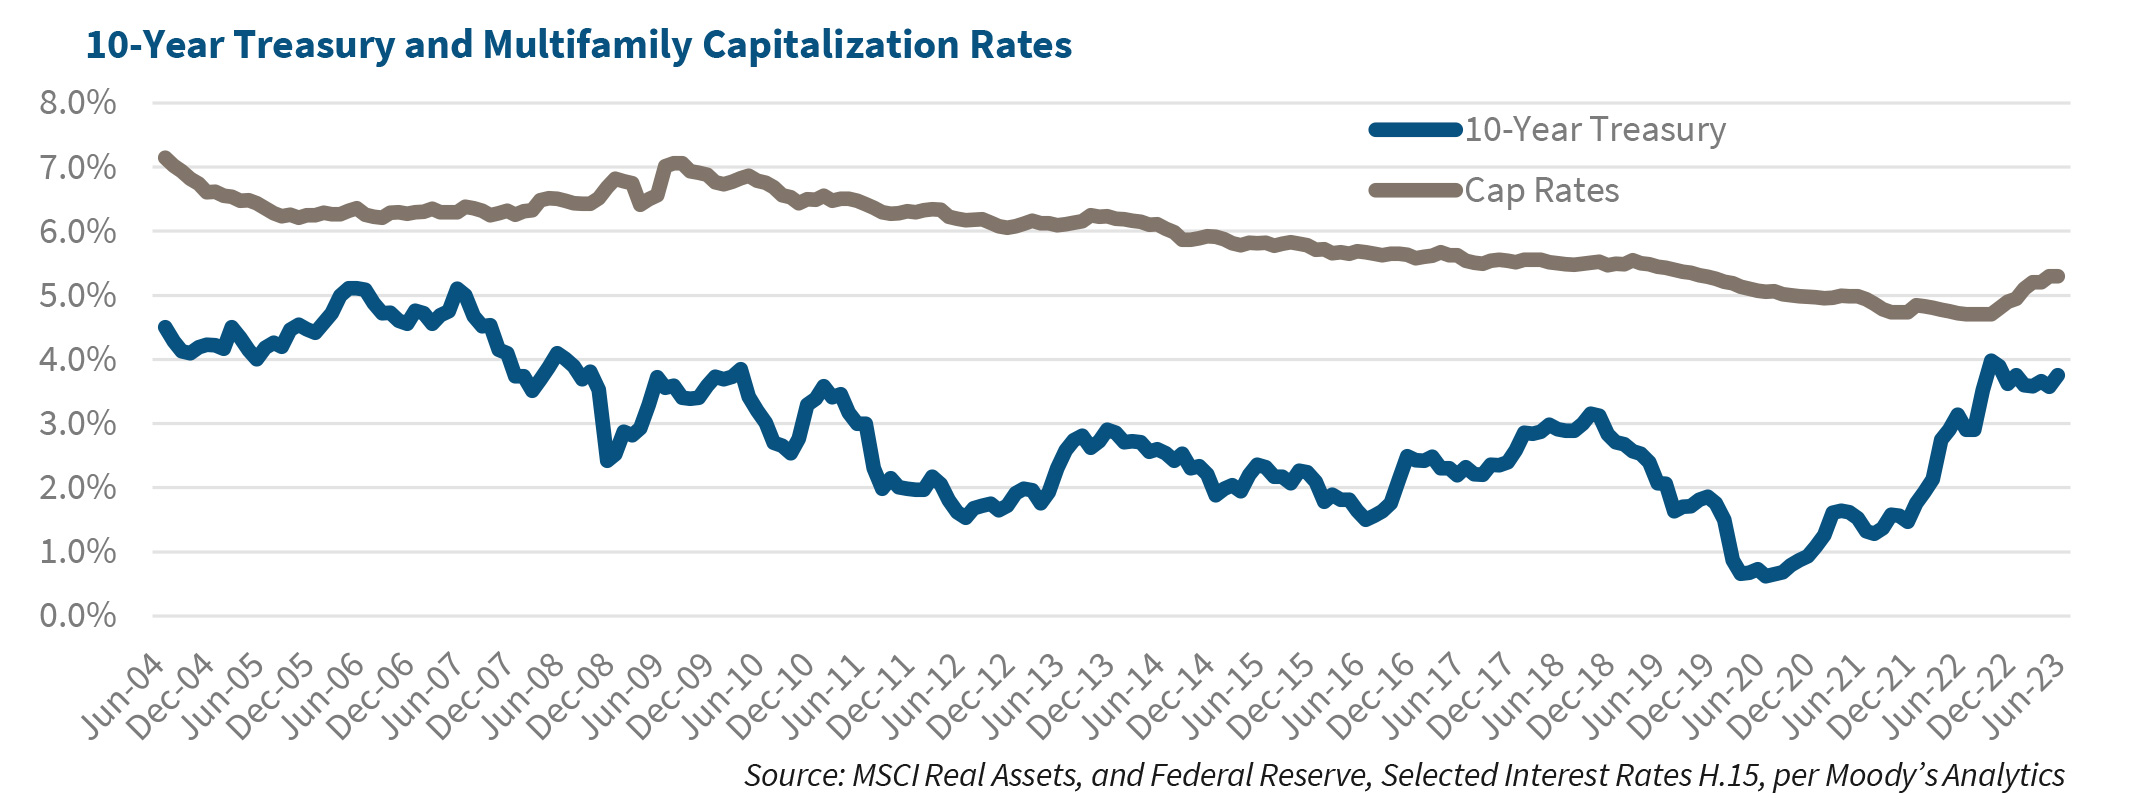 10-Year Treasury and Multifamily Capitalization Rates